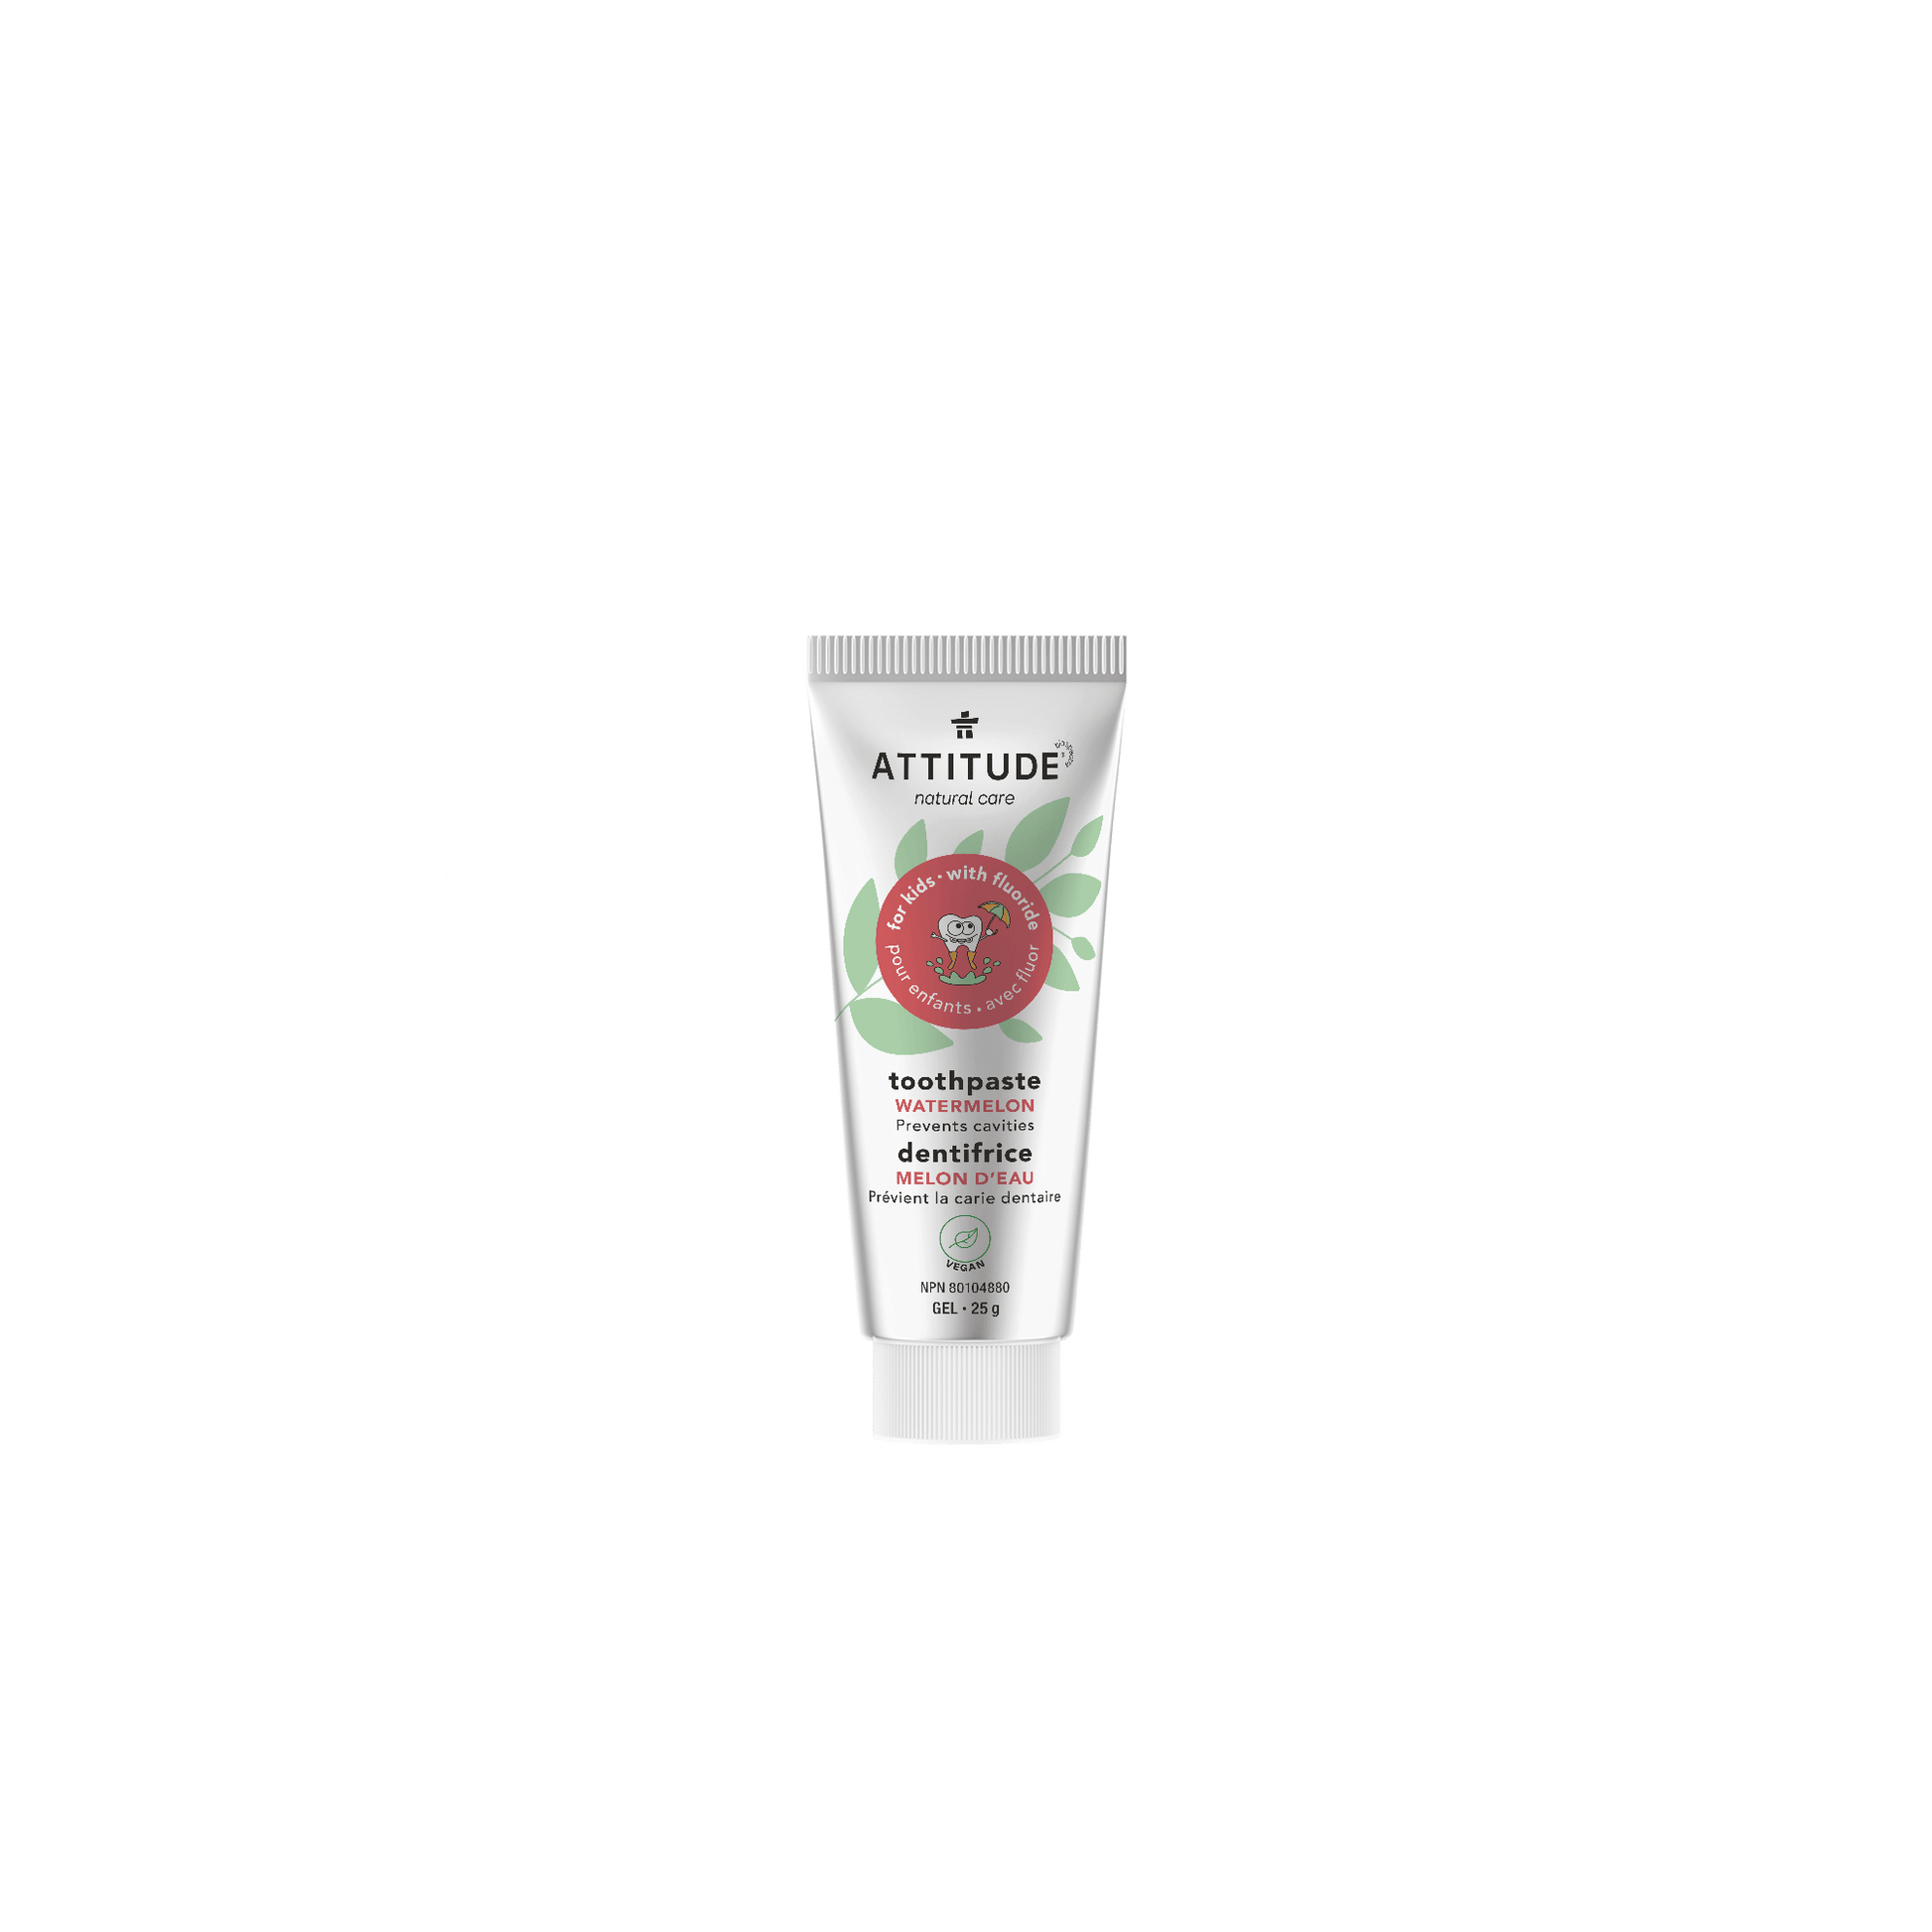 ATTITUDE Travel size Toothpaste with fluor for kids Watermelon_en?_main? 25g